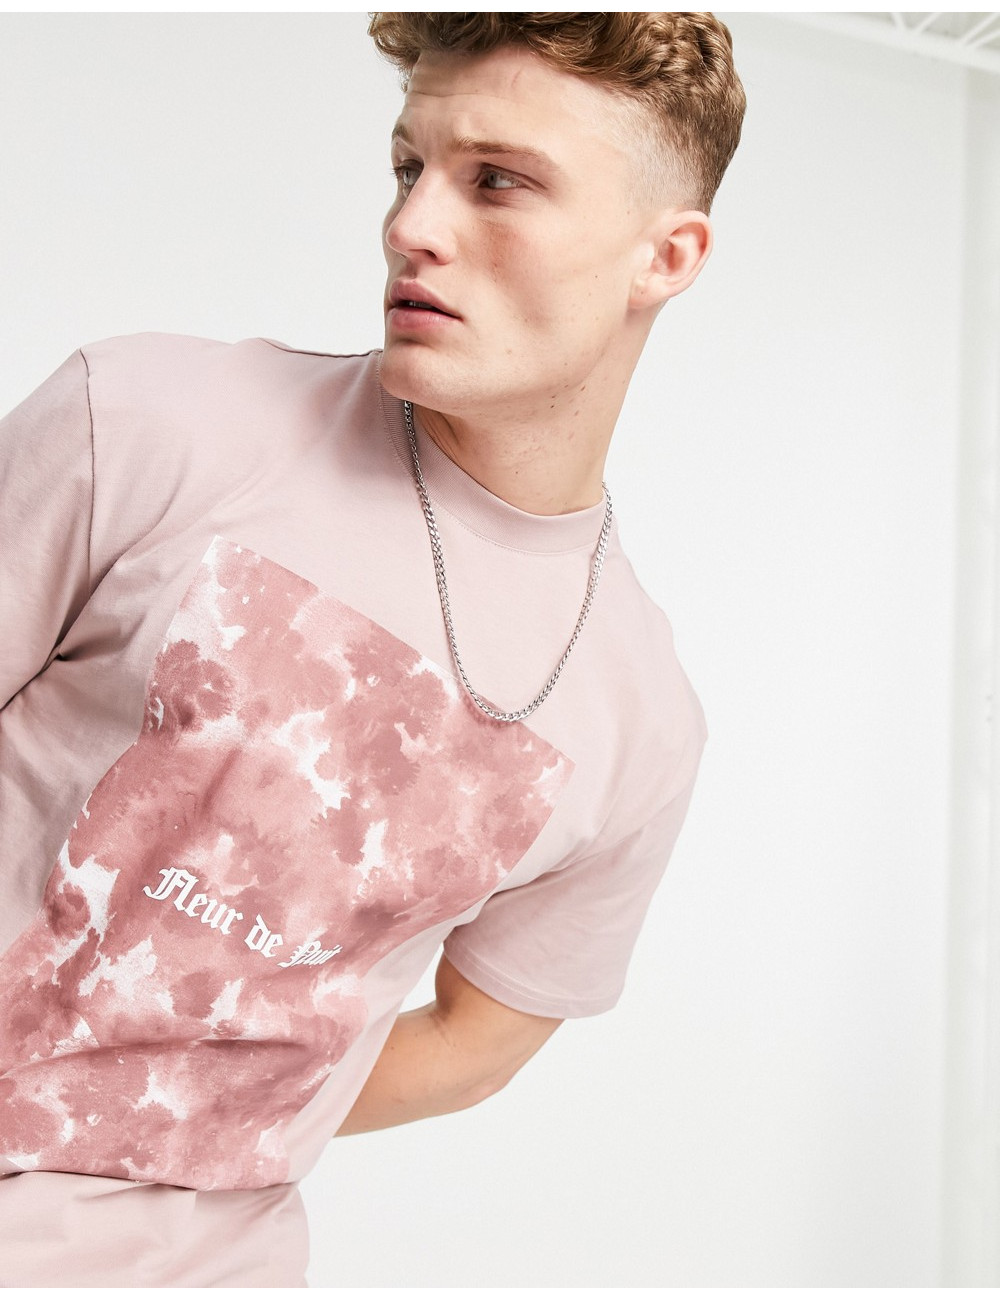 River Island t-shirt with...